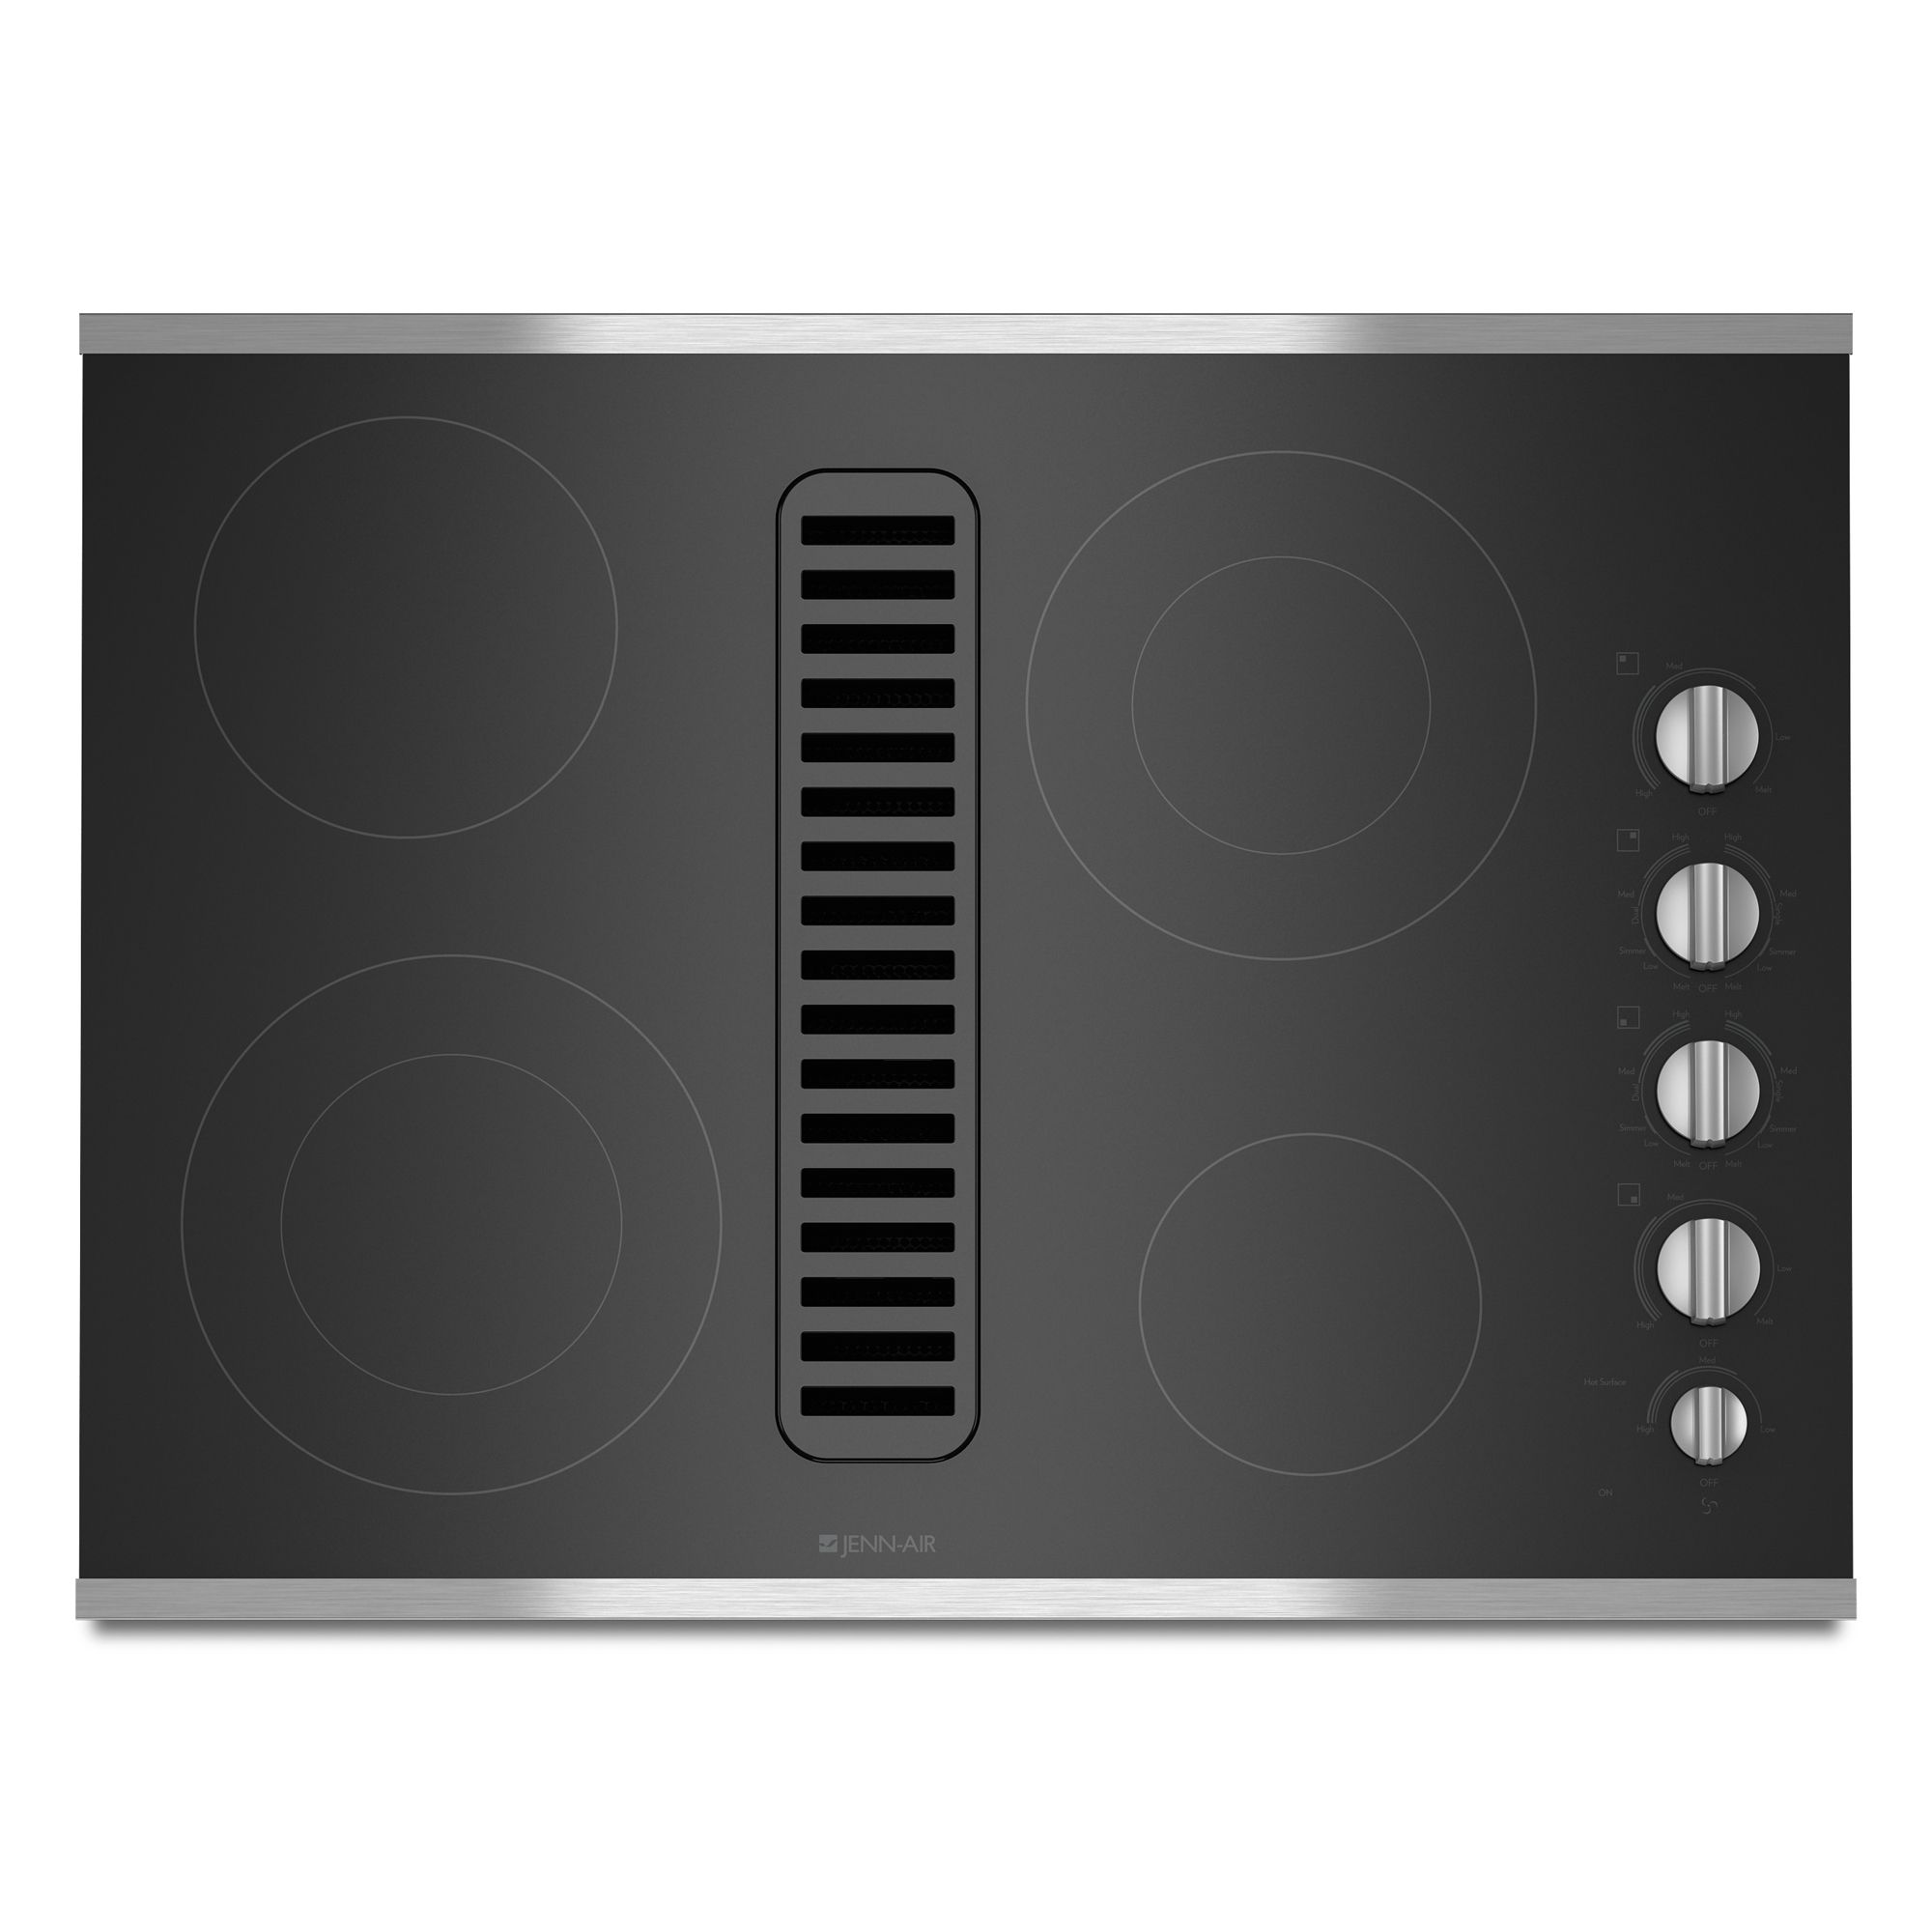 Jenn-Air JED3430WS 30" Electric Radiant Downdraft Cooktop